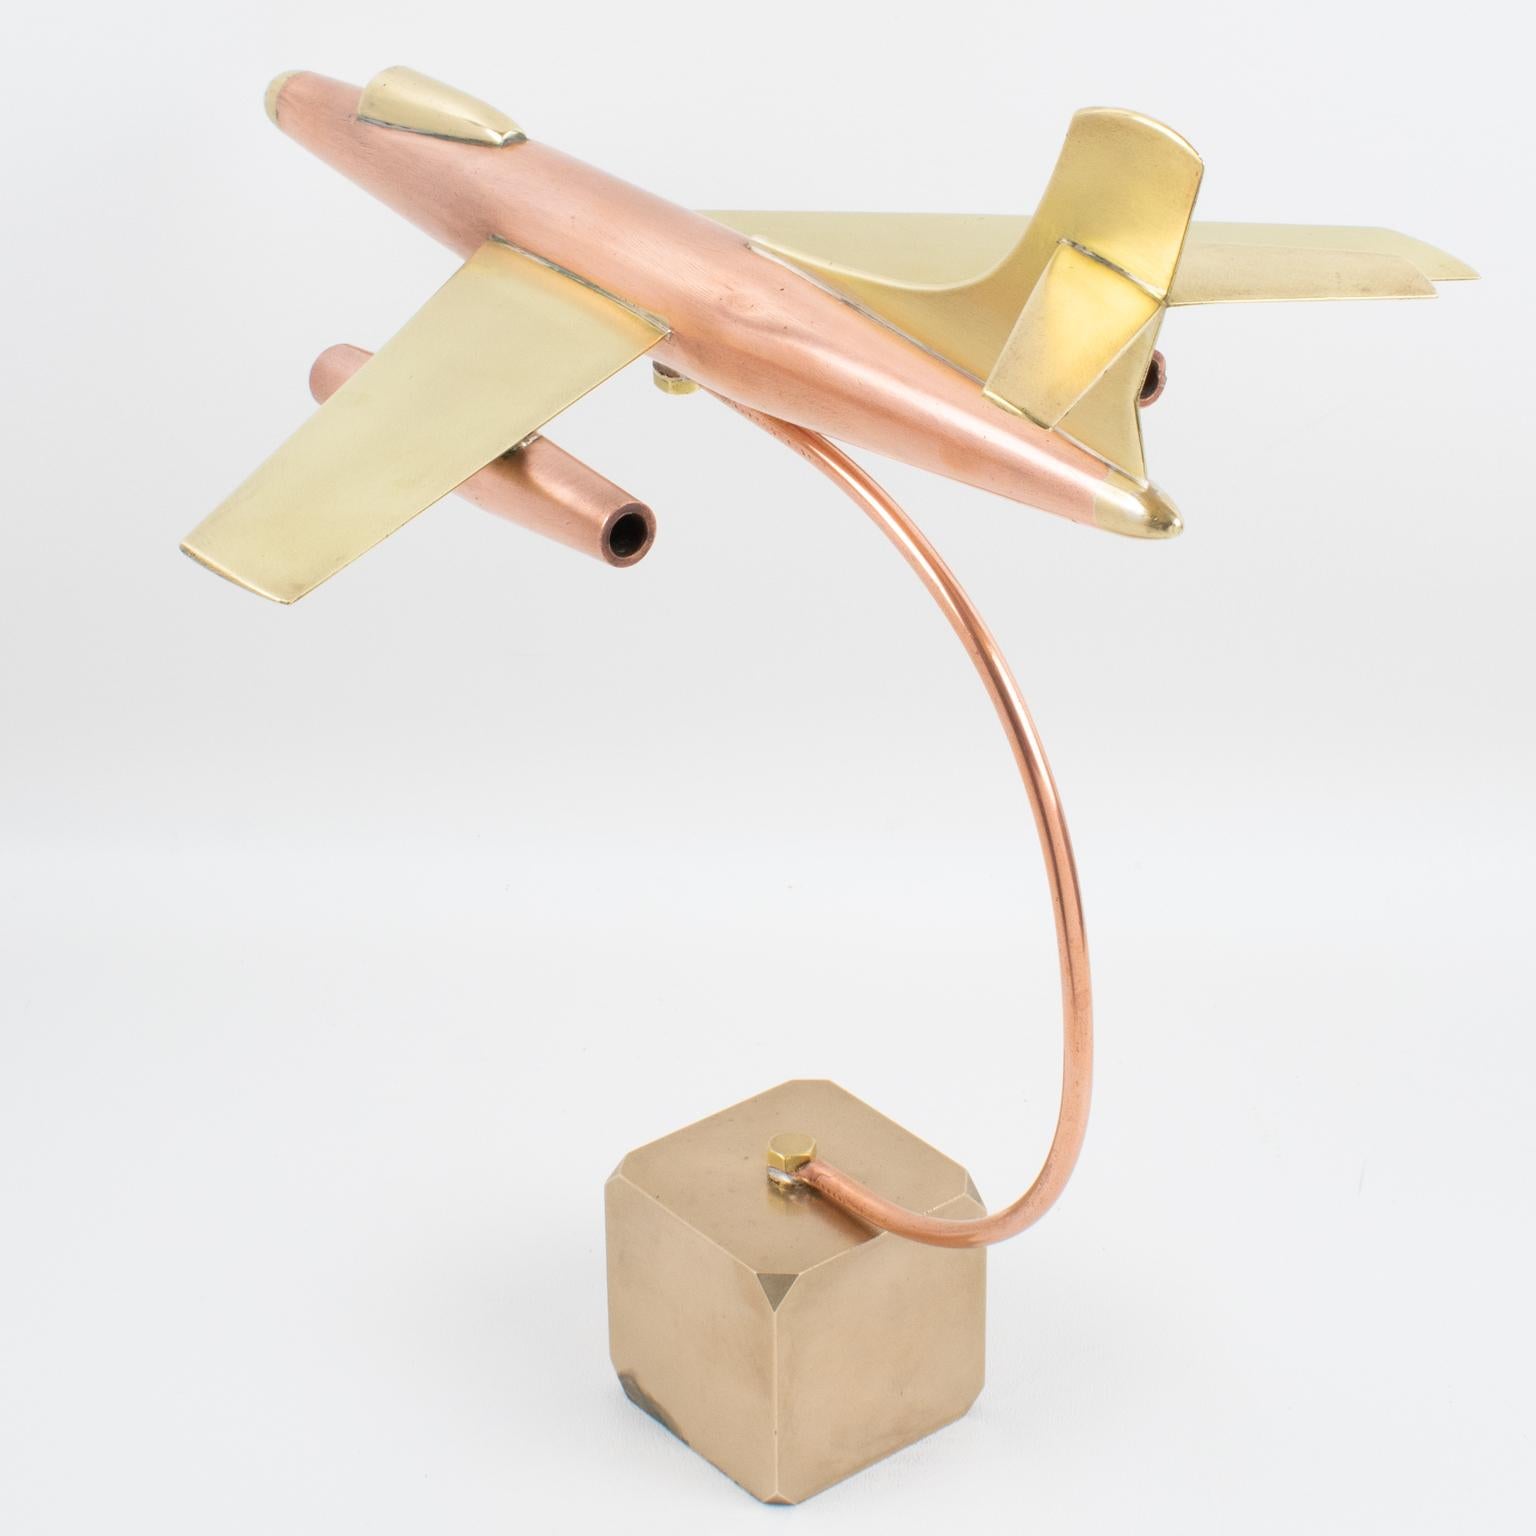 Mid-20th Century Brass and Copper Airplane Jet Aviation Model, France 1960s For Sale